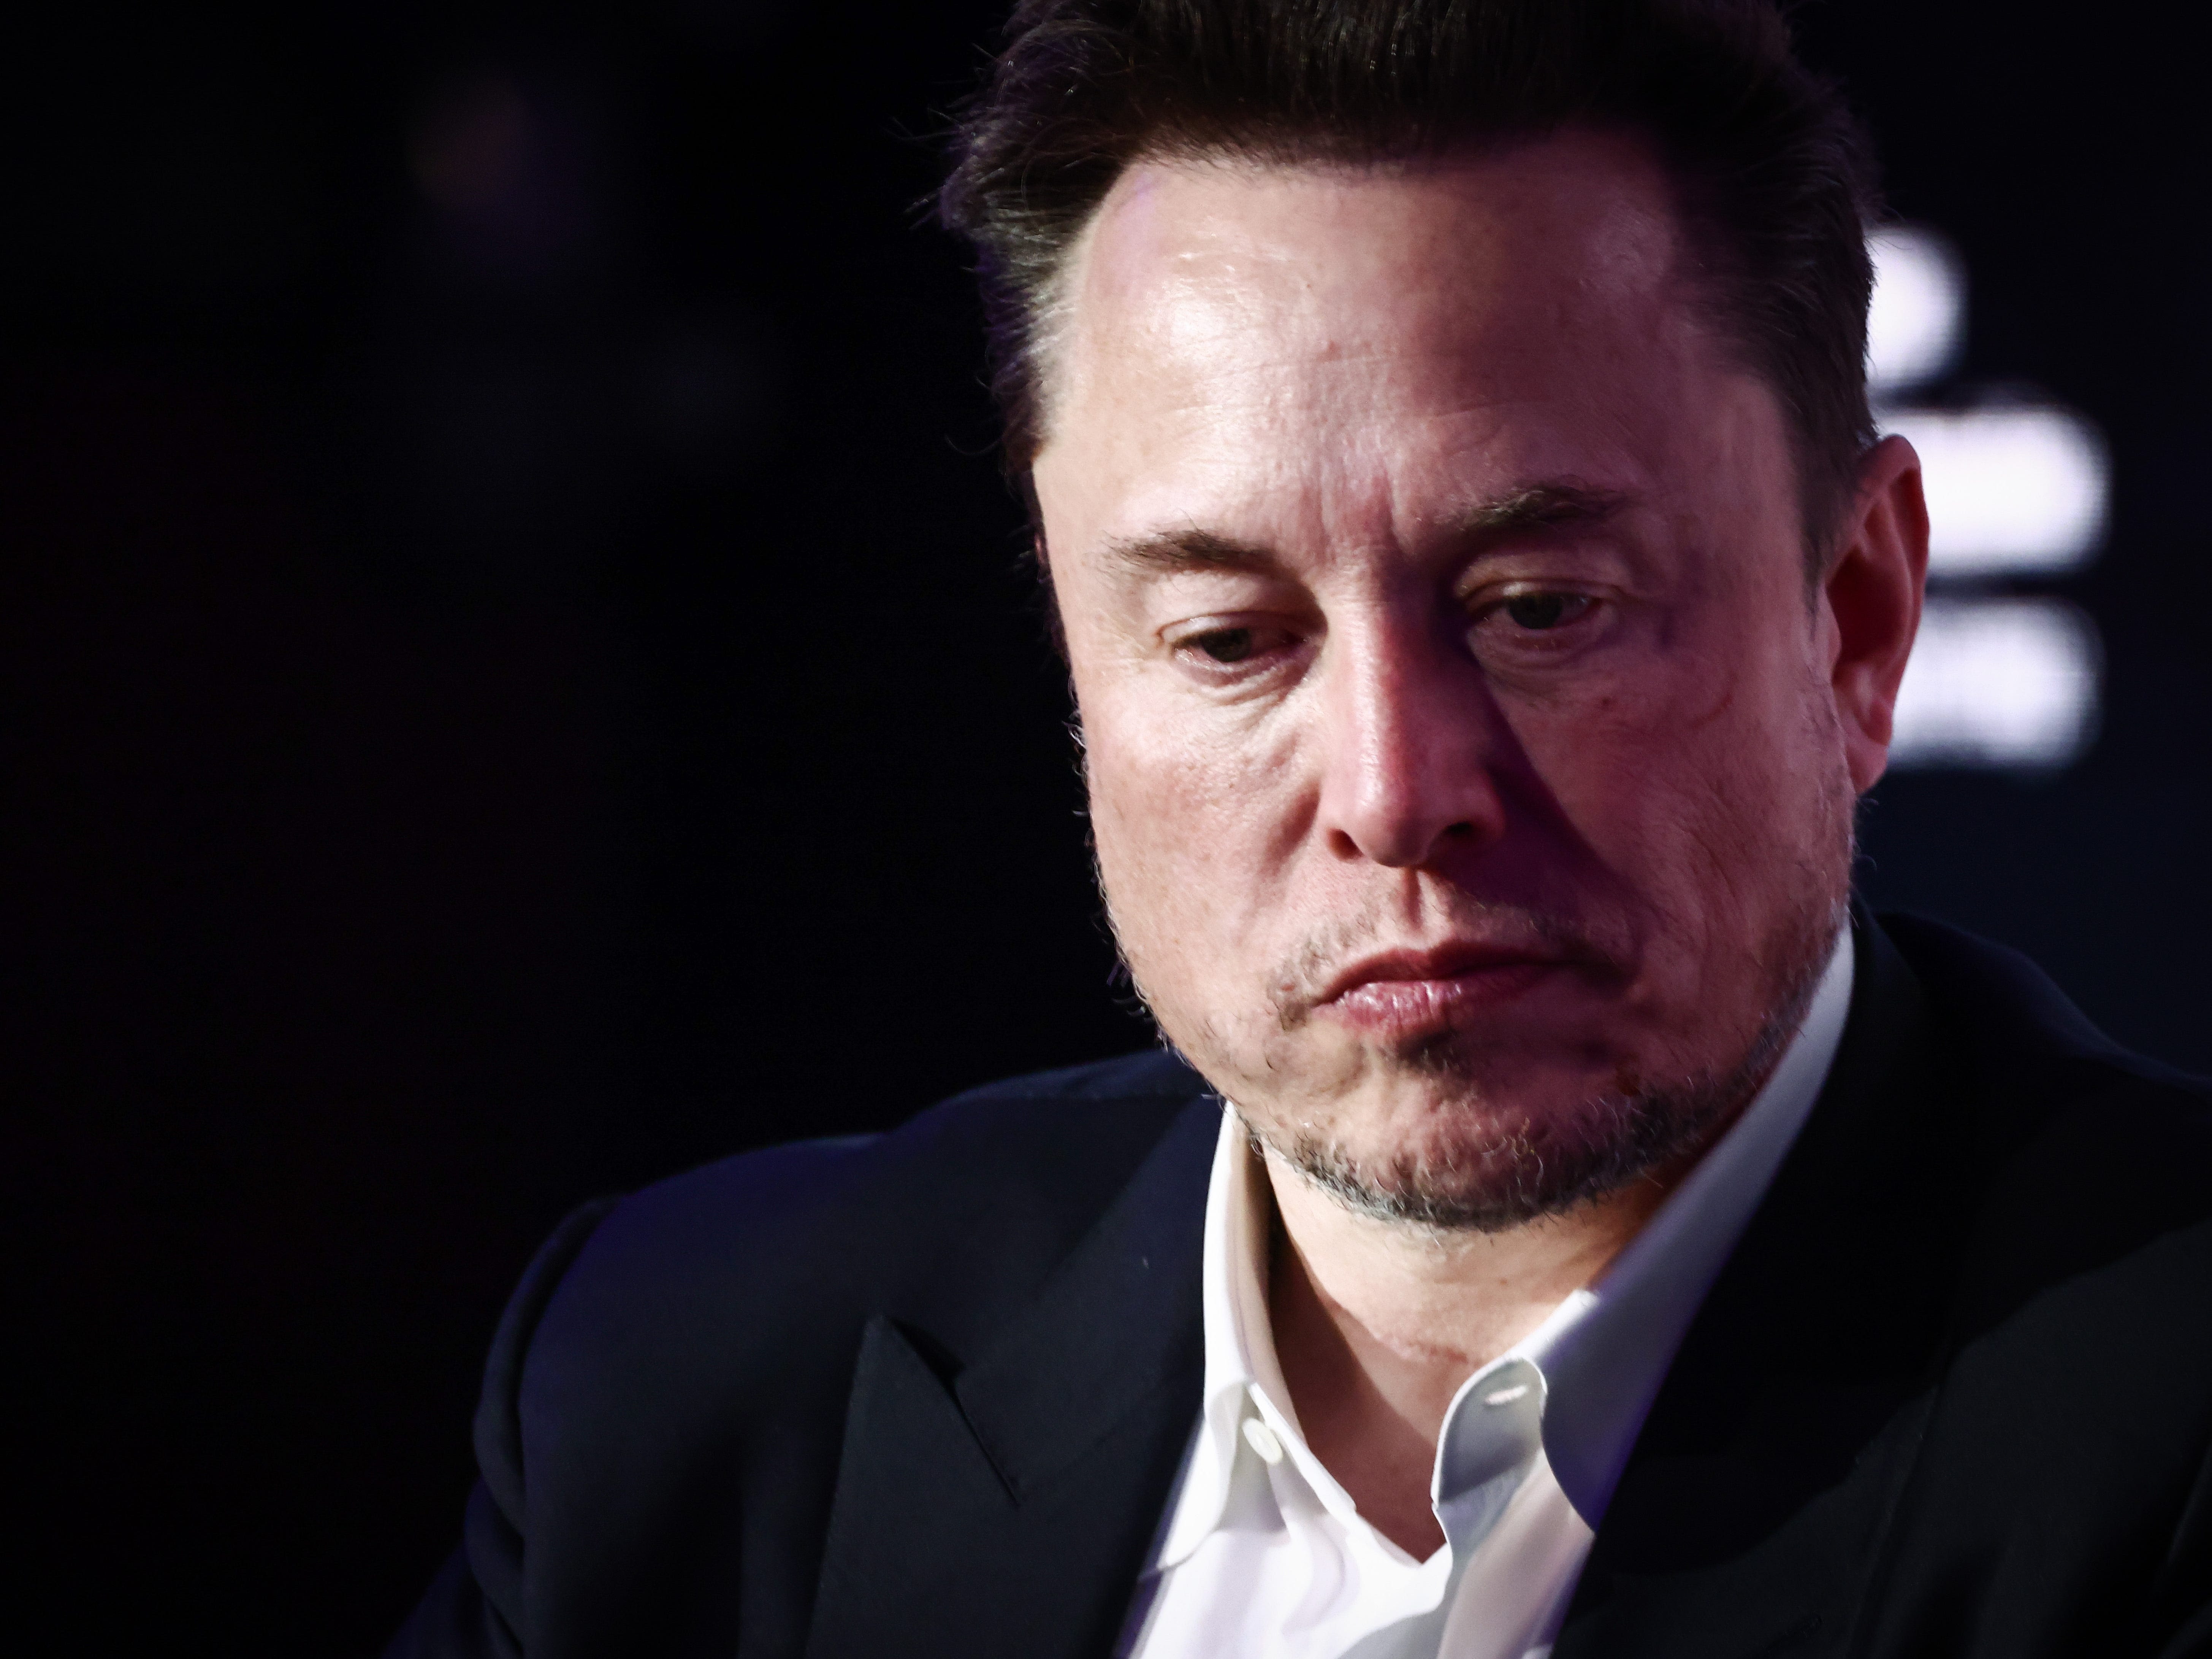 Elon Musk runs successful companies. That doesn't mean he's doing it very well, HR experts say.